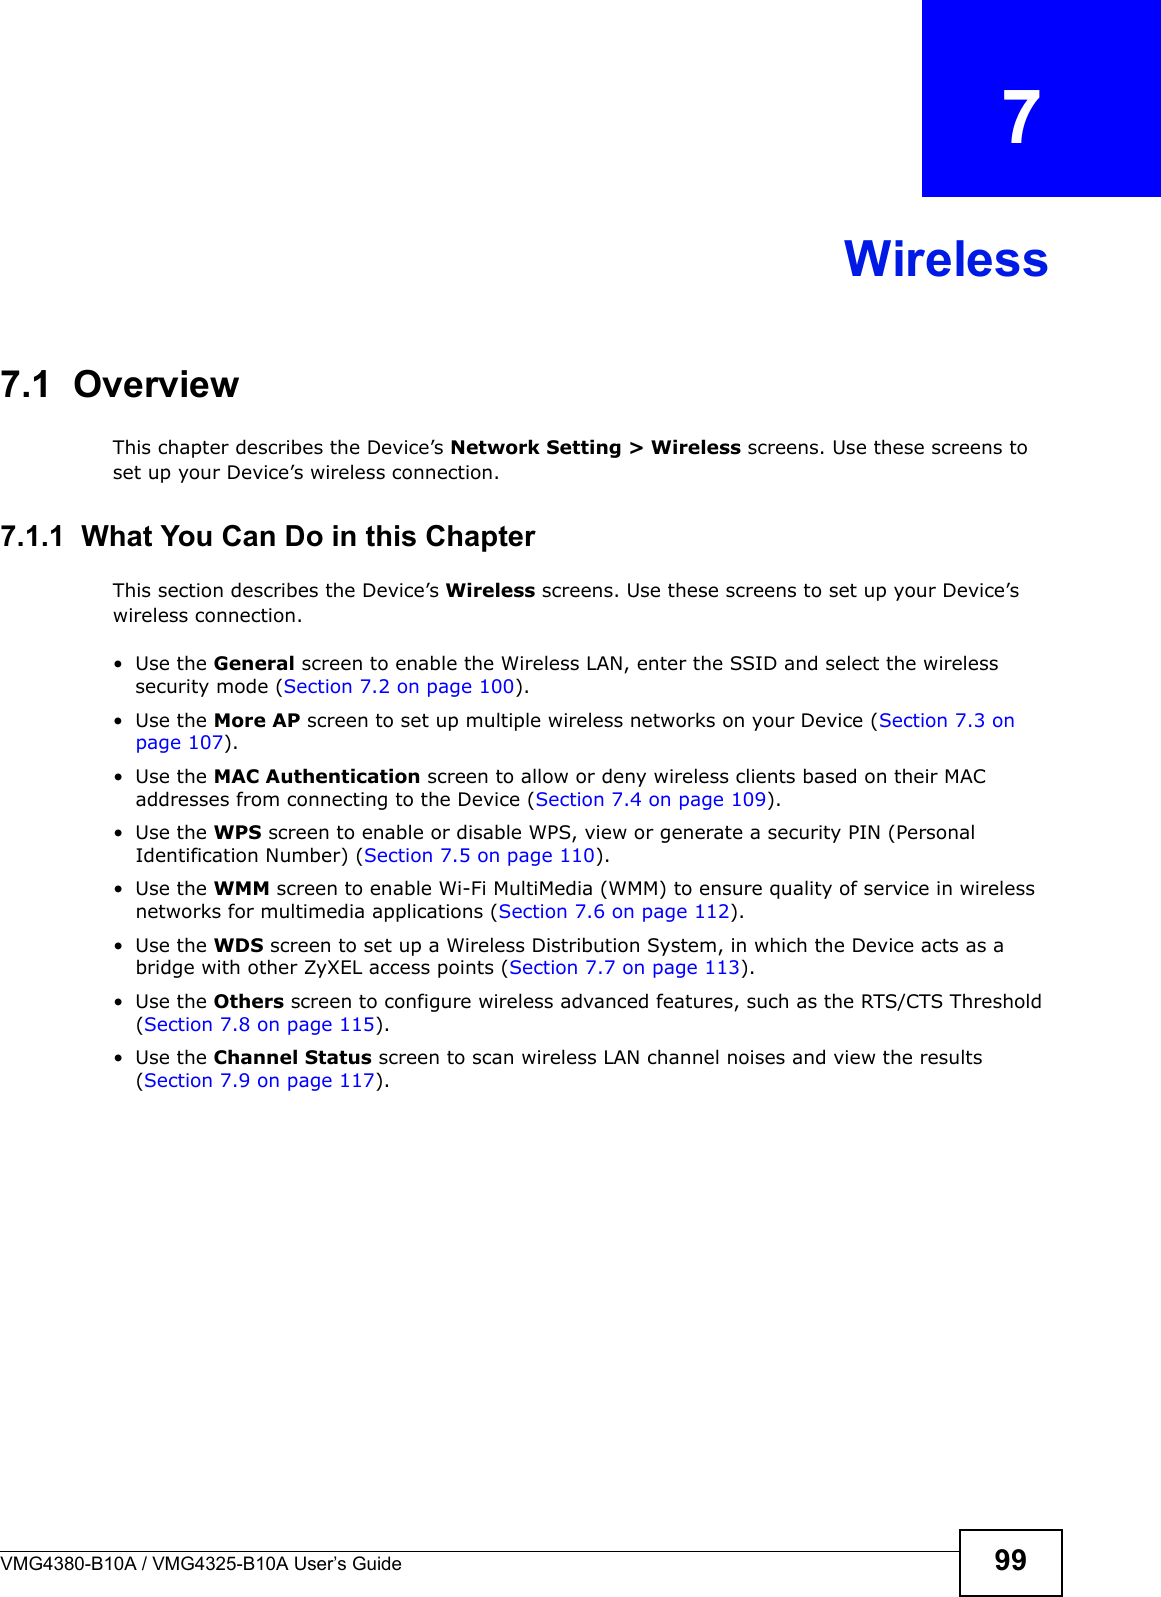 VMG4380-B10A / VMG4325-B10A User’s Guide 99CHAPTER  7Wireless7.1  Overview This chapter describes the Device’s Network Setting &gt; Wireless screens. Use these screens to set up your Device’s wireless connection.7.1.1  What You Can Do in this ChapterThis section describes the Device’s Wireless screens. Use these screens to set up your Device’swireless connection.• Use the General screen to enable the Wireless LAN, enter the SSID and select the wireless security mode (Section 7.2 on page 100).• Use the More AP screen to set up multiple wireless networks on your Device (Section 7.3 on page 107).• Use the MAC Authentication screen to allow or deny wireless clients based on their MAC addresses from connecting to the Device (Section 7.4 on page 109).• Use the WPS screen to enable or disable WPS, view or generate a security PIN (Personal Identification Number) (Section 7.5 on page 110).• Use the WMM screen to enable Wi-Fi MultiMedia (WMM) to ensure quality of service in wireless networks for multimedia applications (Section 7.6 on page 112). • Use the WDS screen to set up a Wireless Distribution System, in which the Device acts as a bridge with other ZyXEL access points (Section 7.7 on page 113).• Use the Others screen to configure wireless advanced features, such as the RTS/CTS Threshold (Section 7.8 on page 115).• Use the Channel Status screen to scan wireless LAN channel noises and view the results (Section 7.9 on page 117).